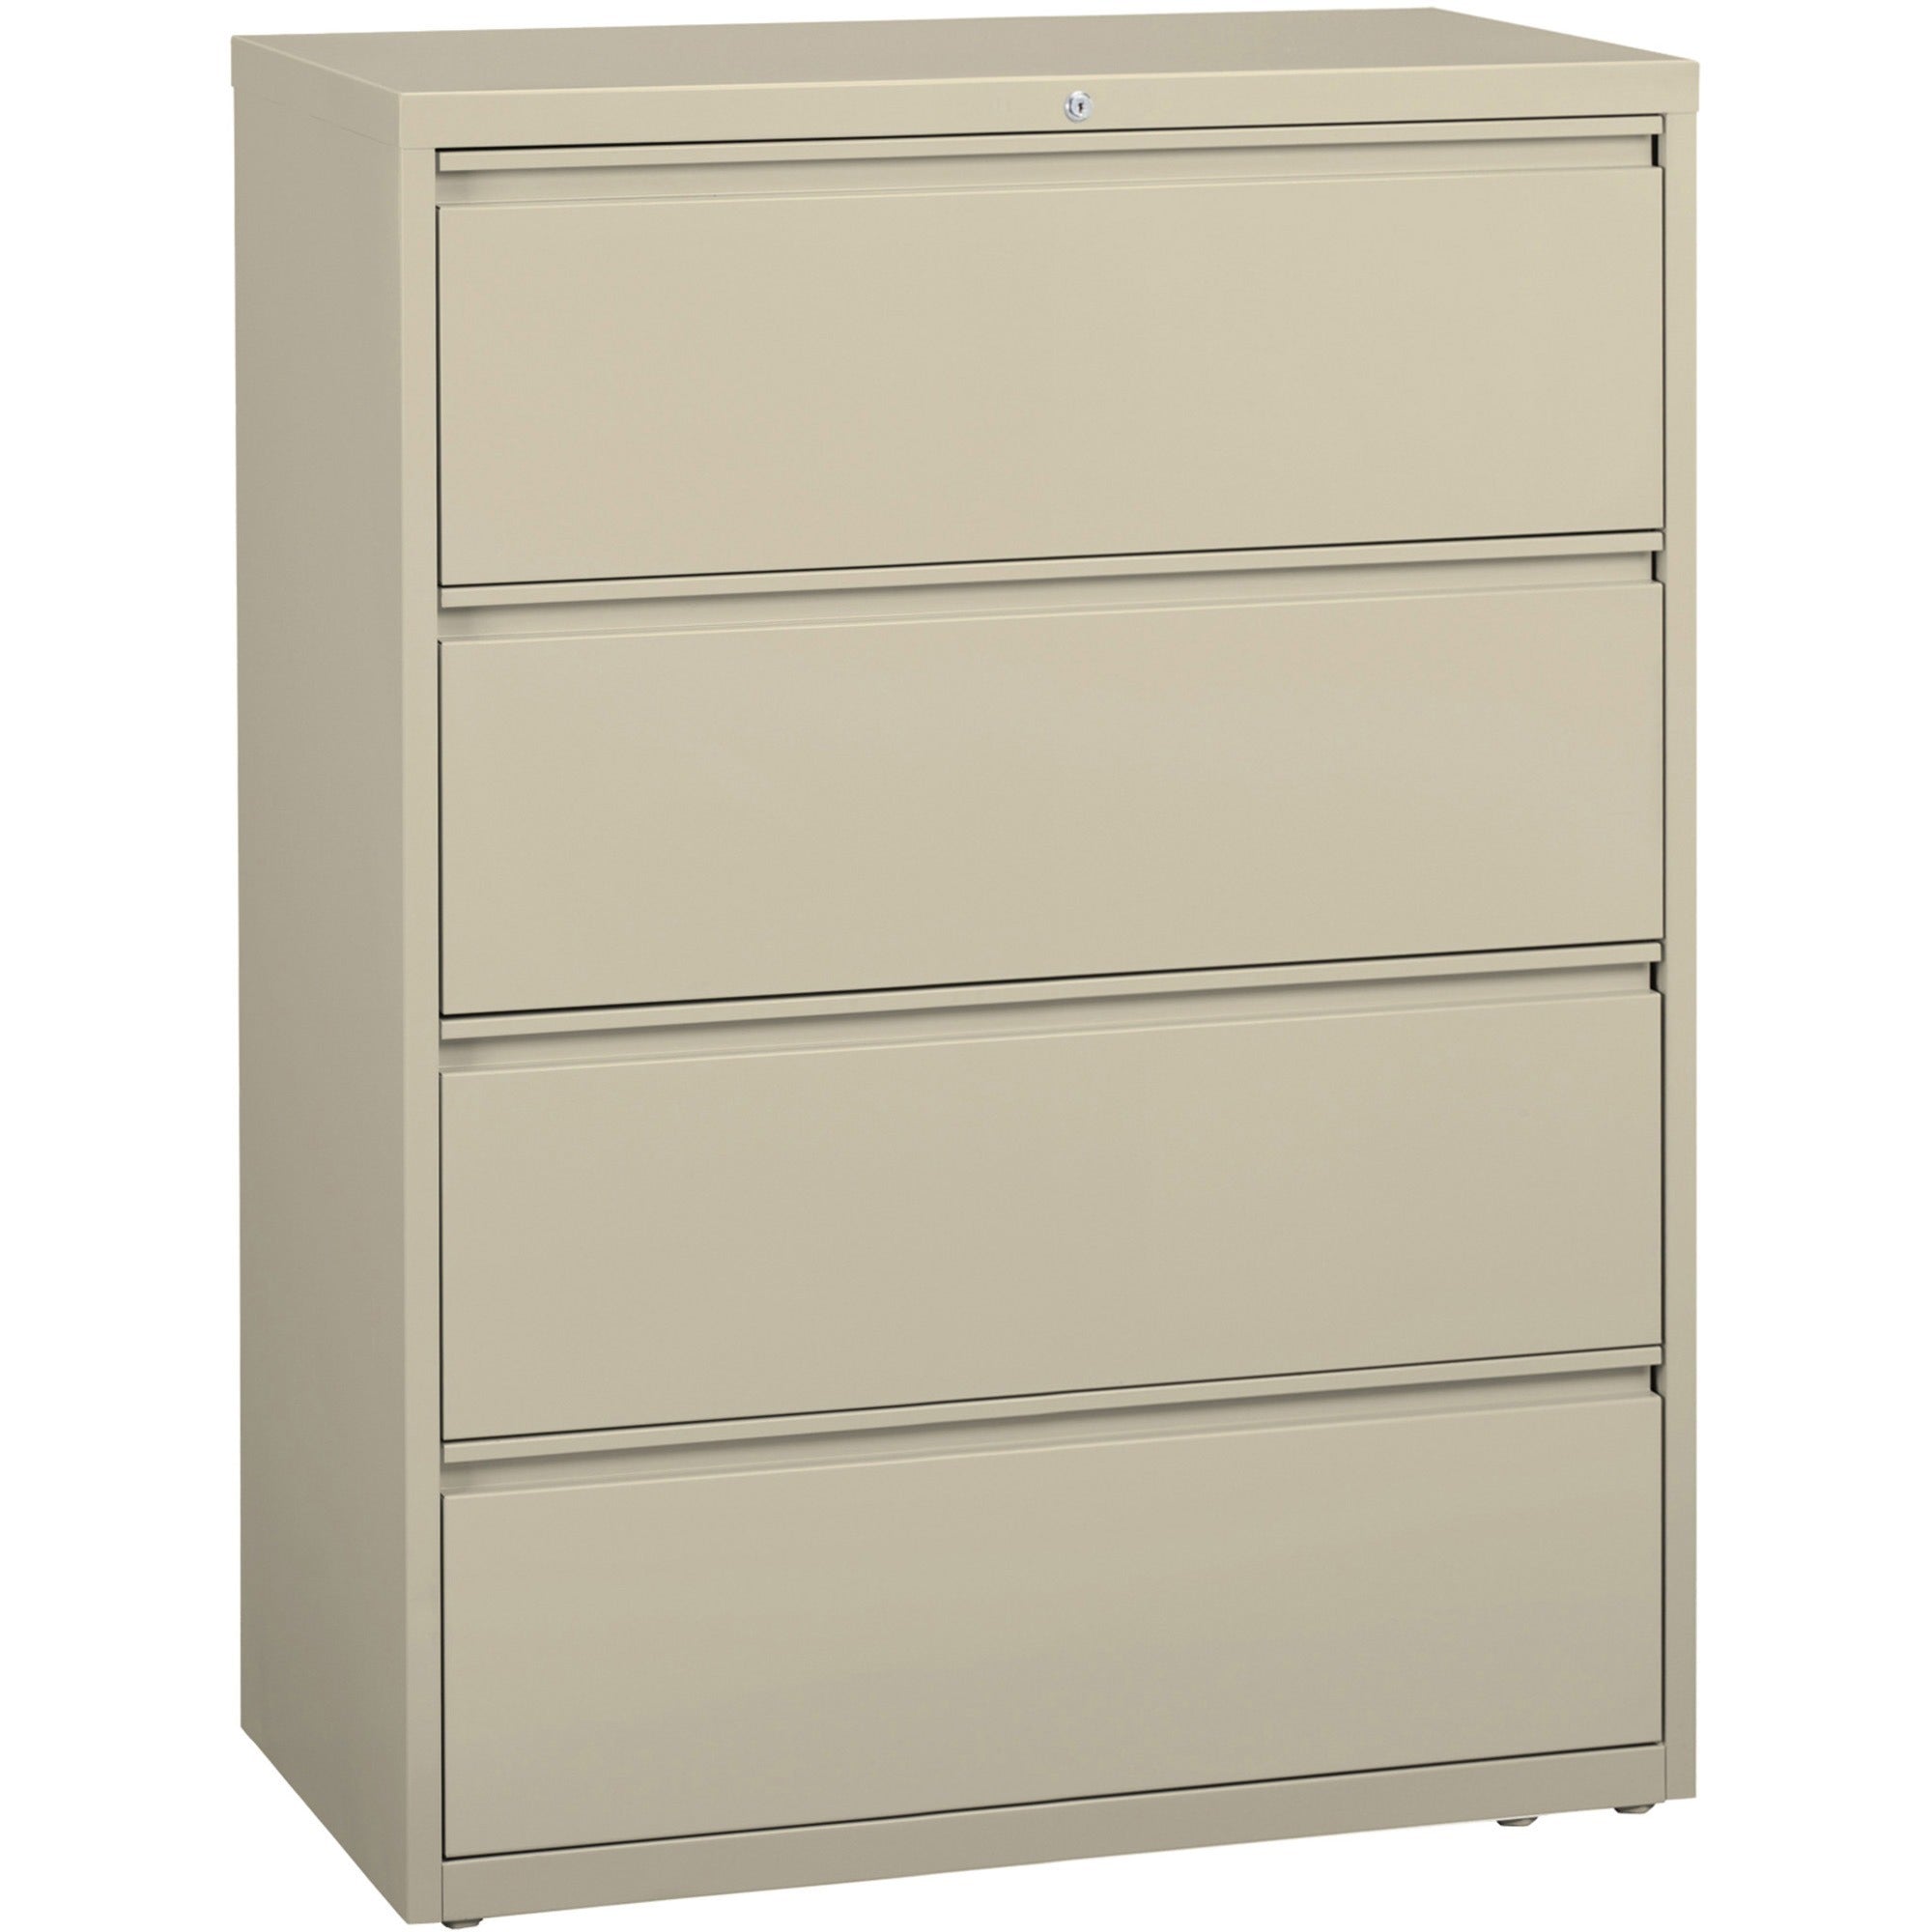 Lorell Fortress Series Lateral File - 42" x 18.6" x 52.5" - 4 x Drawer(s) for File - Legal, Letter, A4 - Lateral - Rust Proof, Leveling Glide, Interlocking, Ball-bearing Suspension, Label Holder - Putty - Baked Enamel - Recycled - 